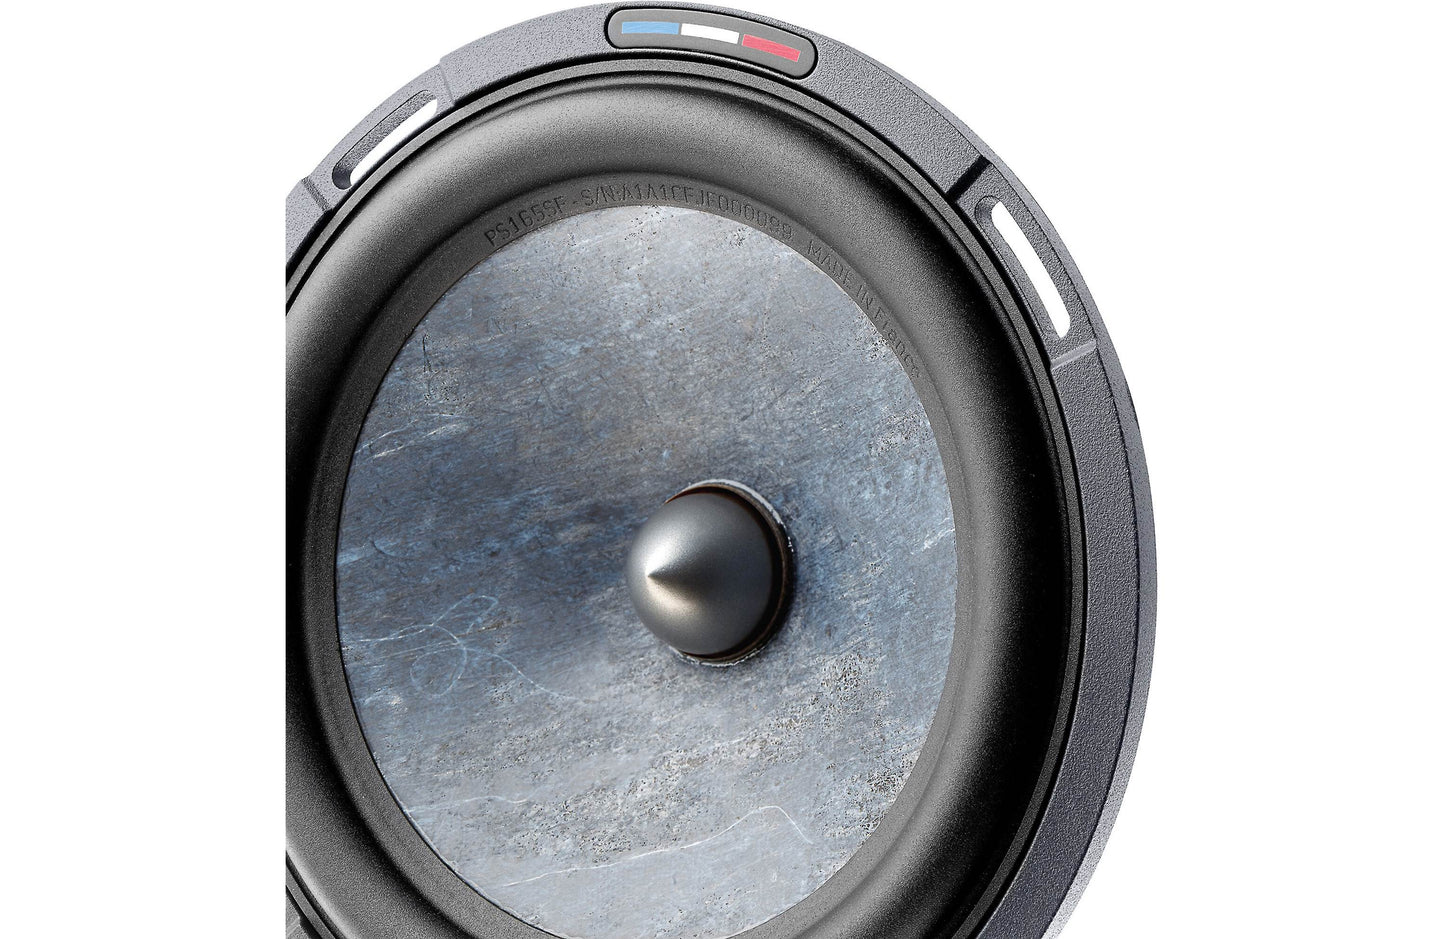 Focal PS 165 SF 6-1/2" component speaker system